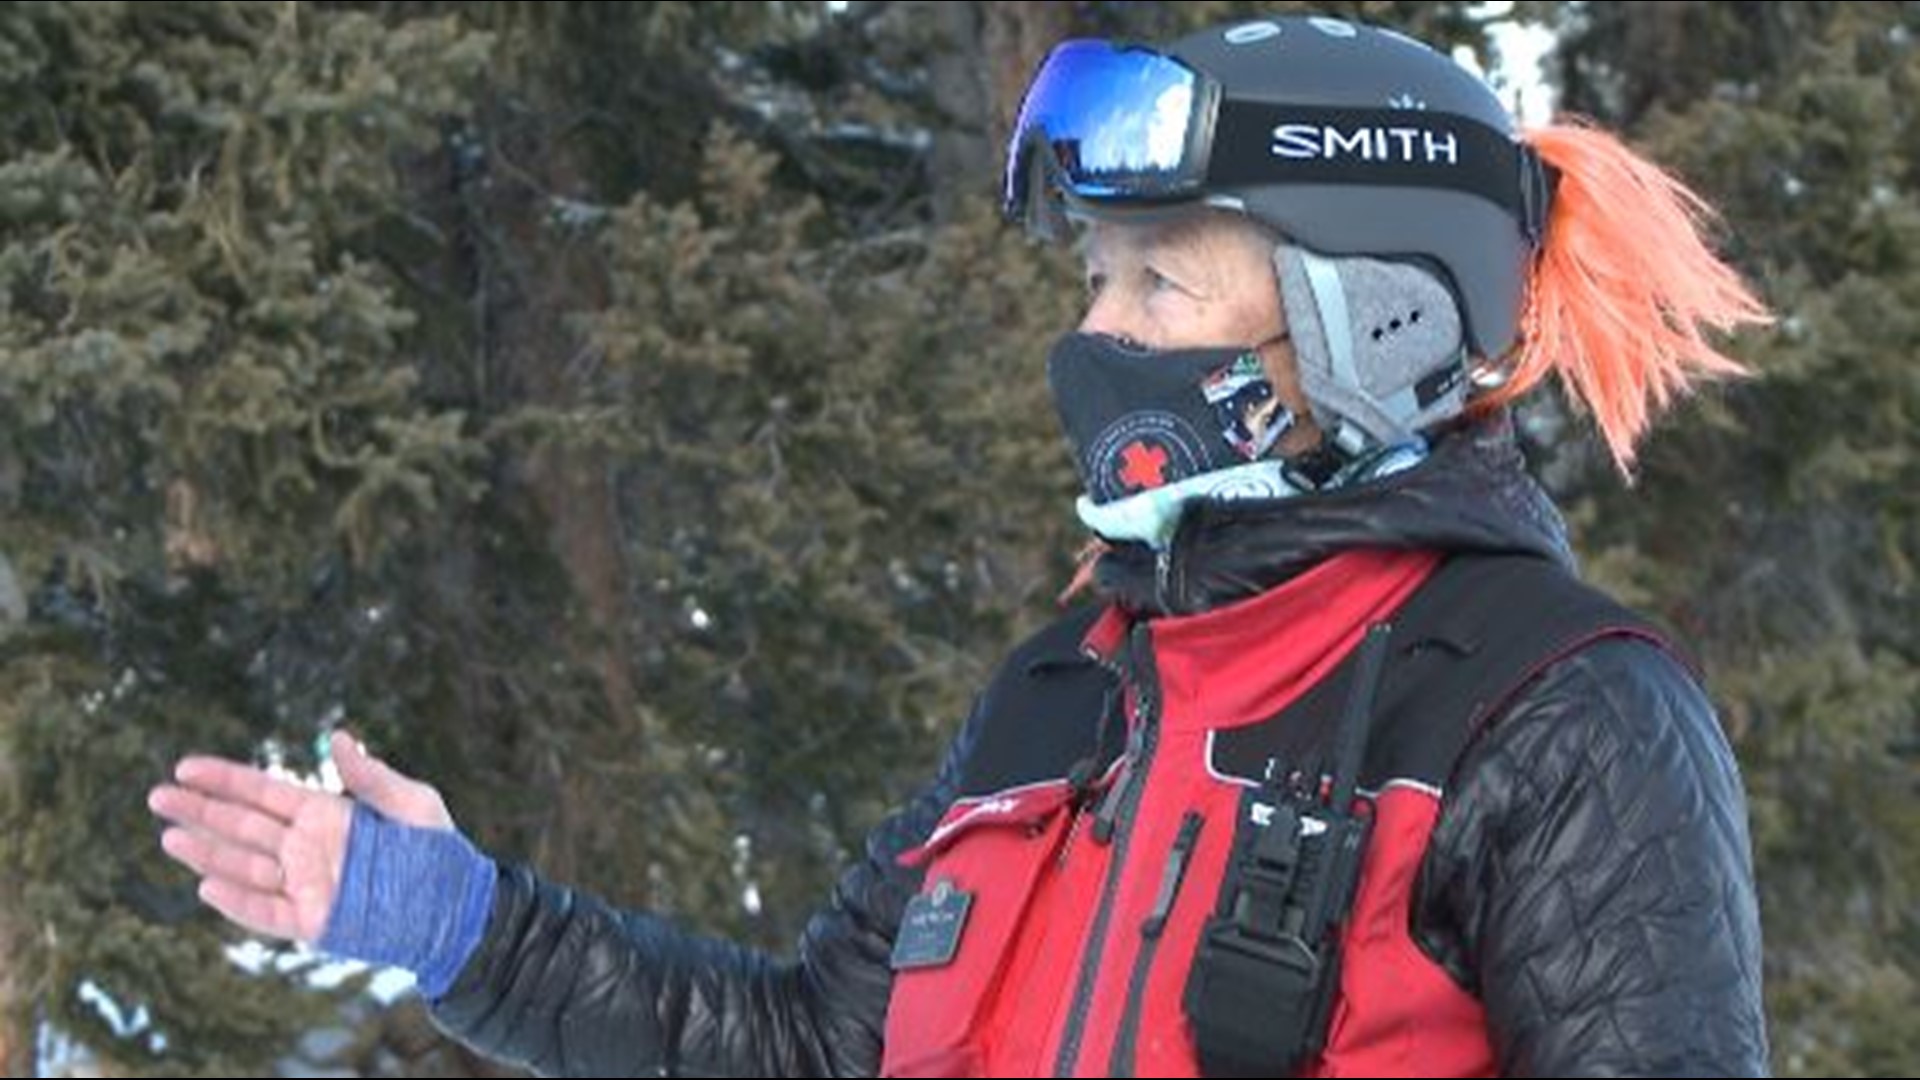 Addy McCord has led the Beaver Creek Ski Patrol for half of her 40 years at the resort. Her team is made up of one-third women, 10 percent higher than the average.